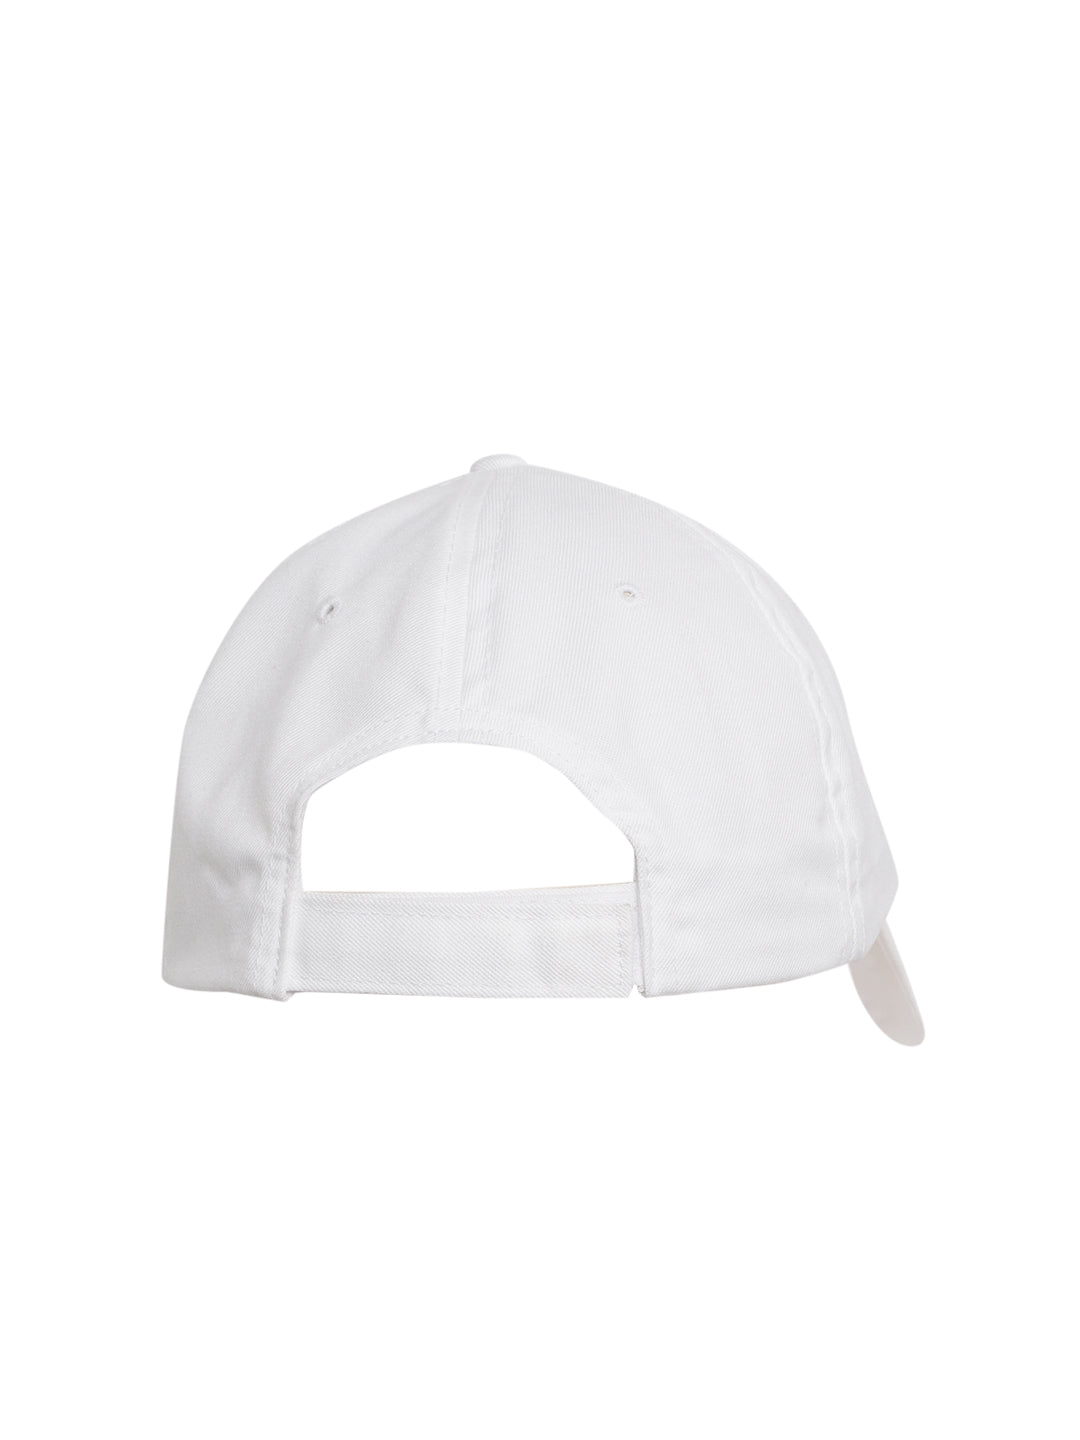 Blueberry BAD HAIR DAY embroidery White baseball cap